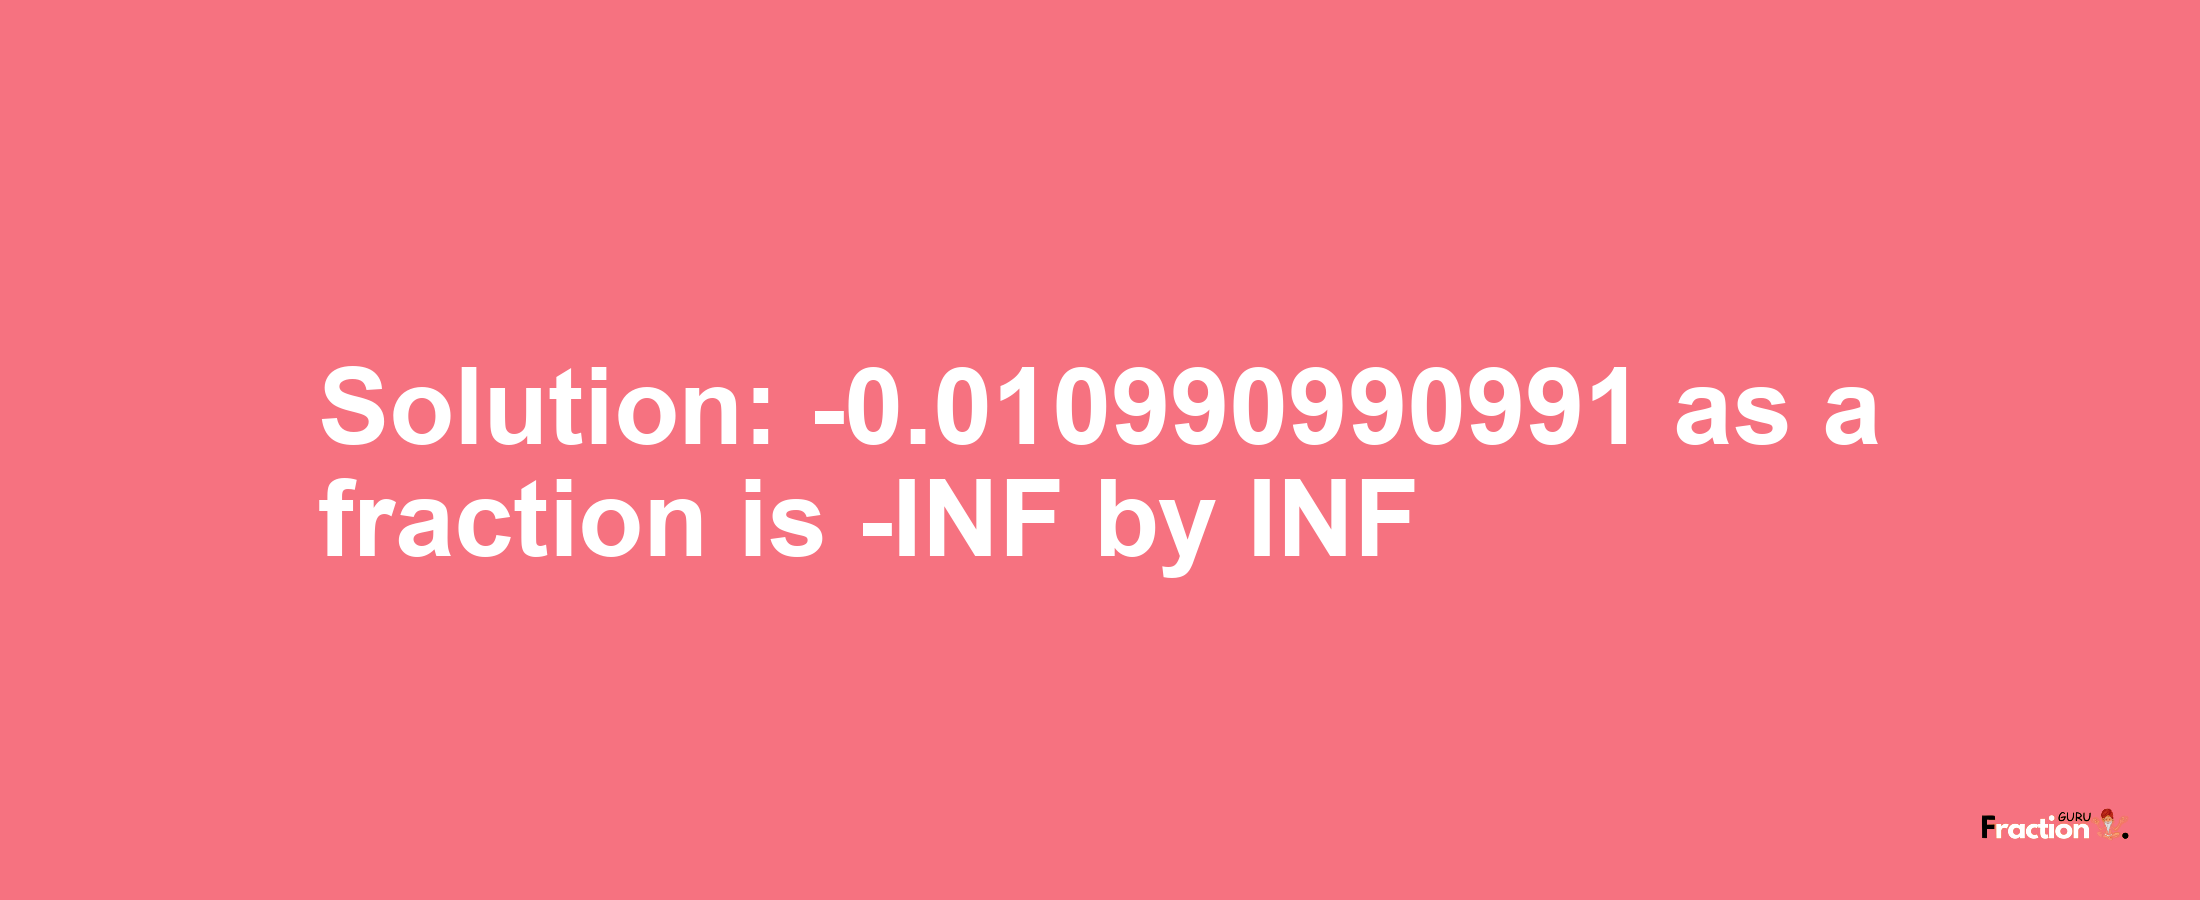 Solution:-0.010990990991 as a fraction is -INF/INF